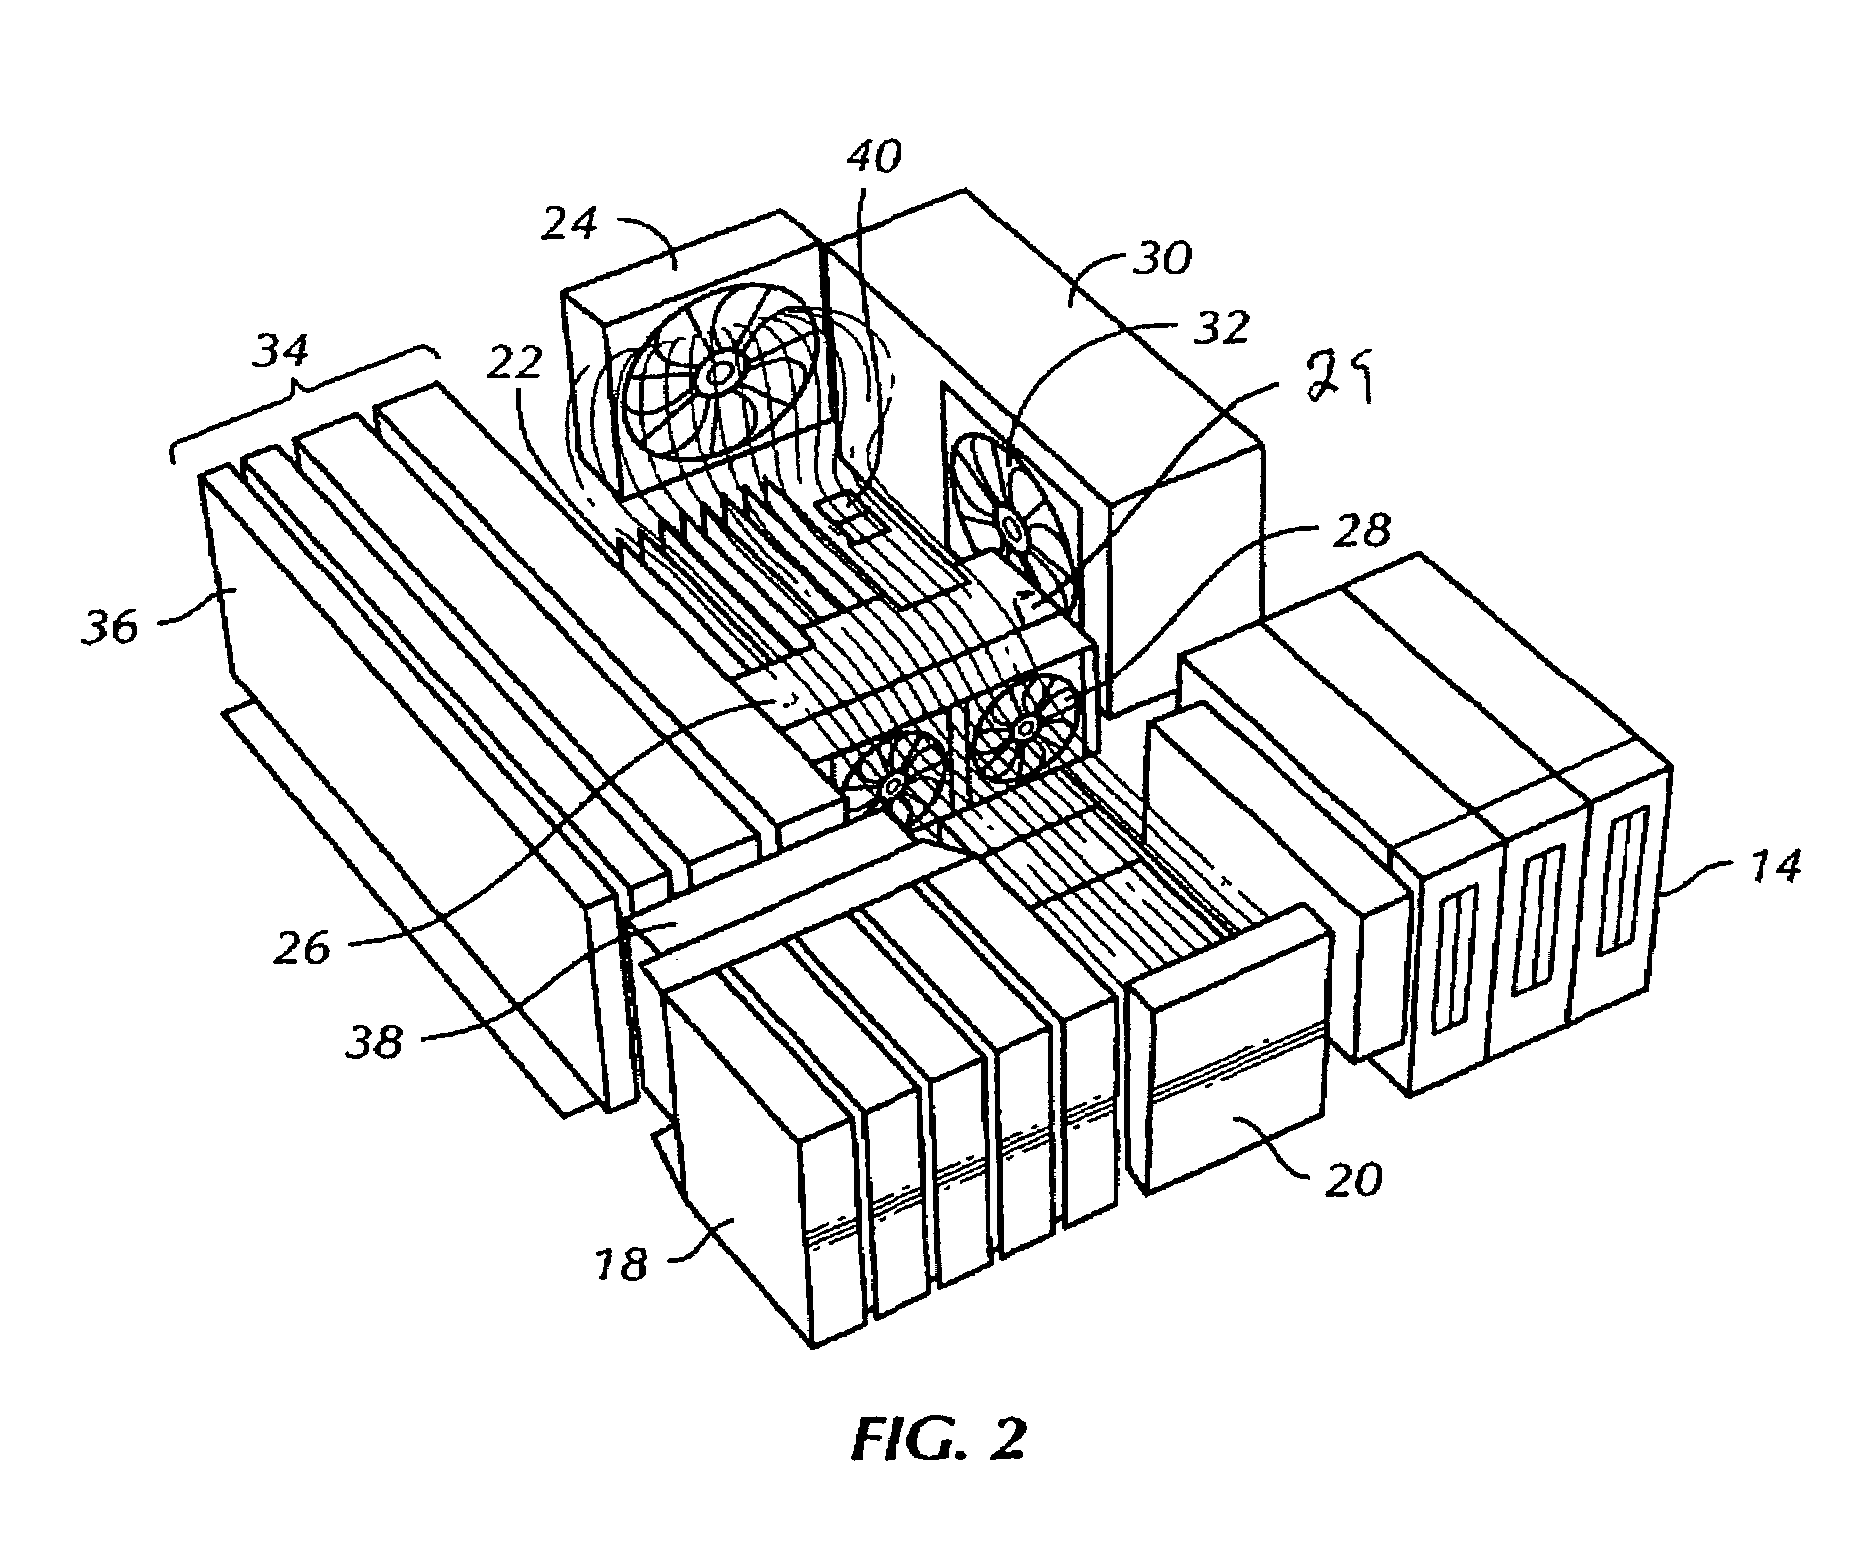 Computer with improved cooling features